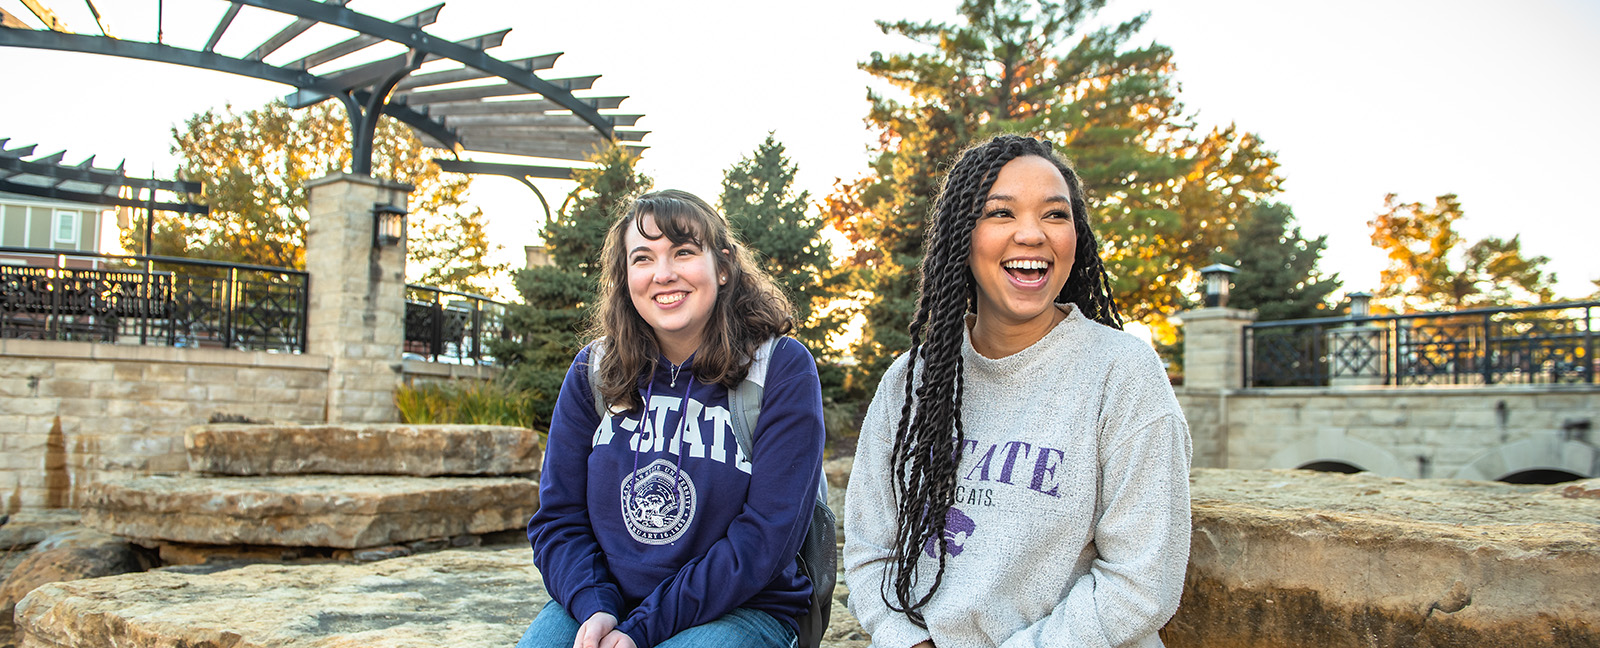 Two students sit near jardine, smiling and looking into the distance, they are wearing K-state sweatshirts